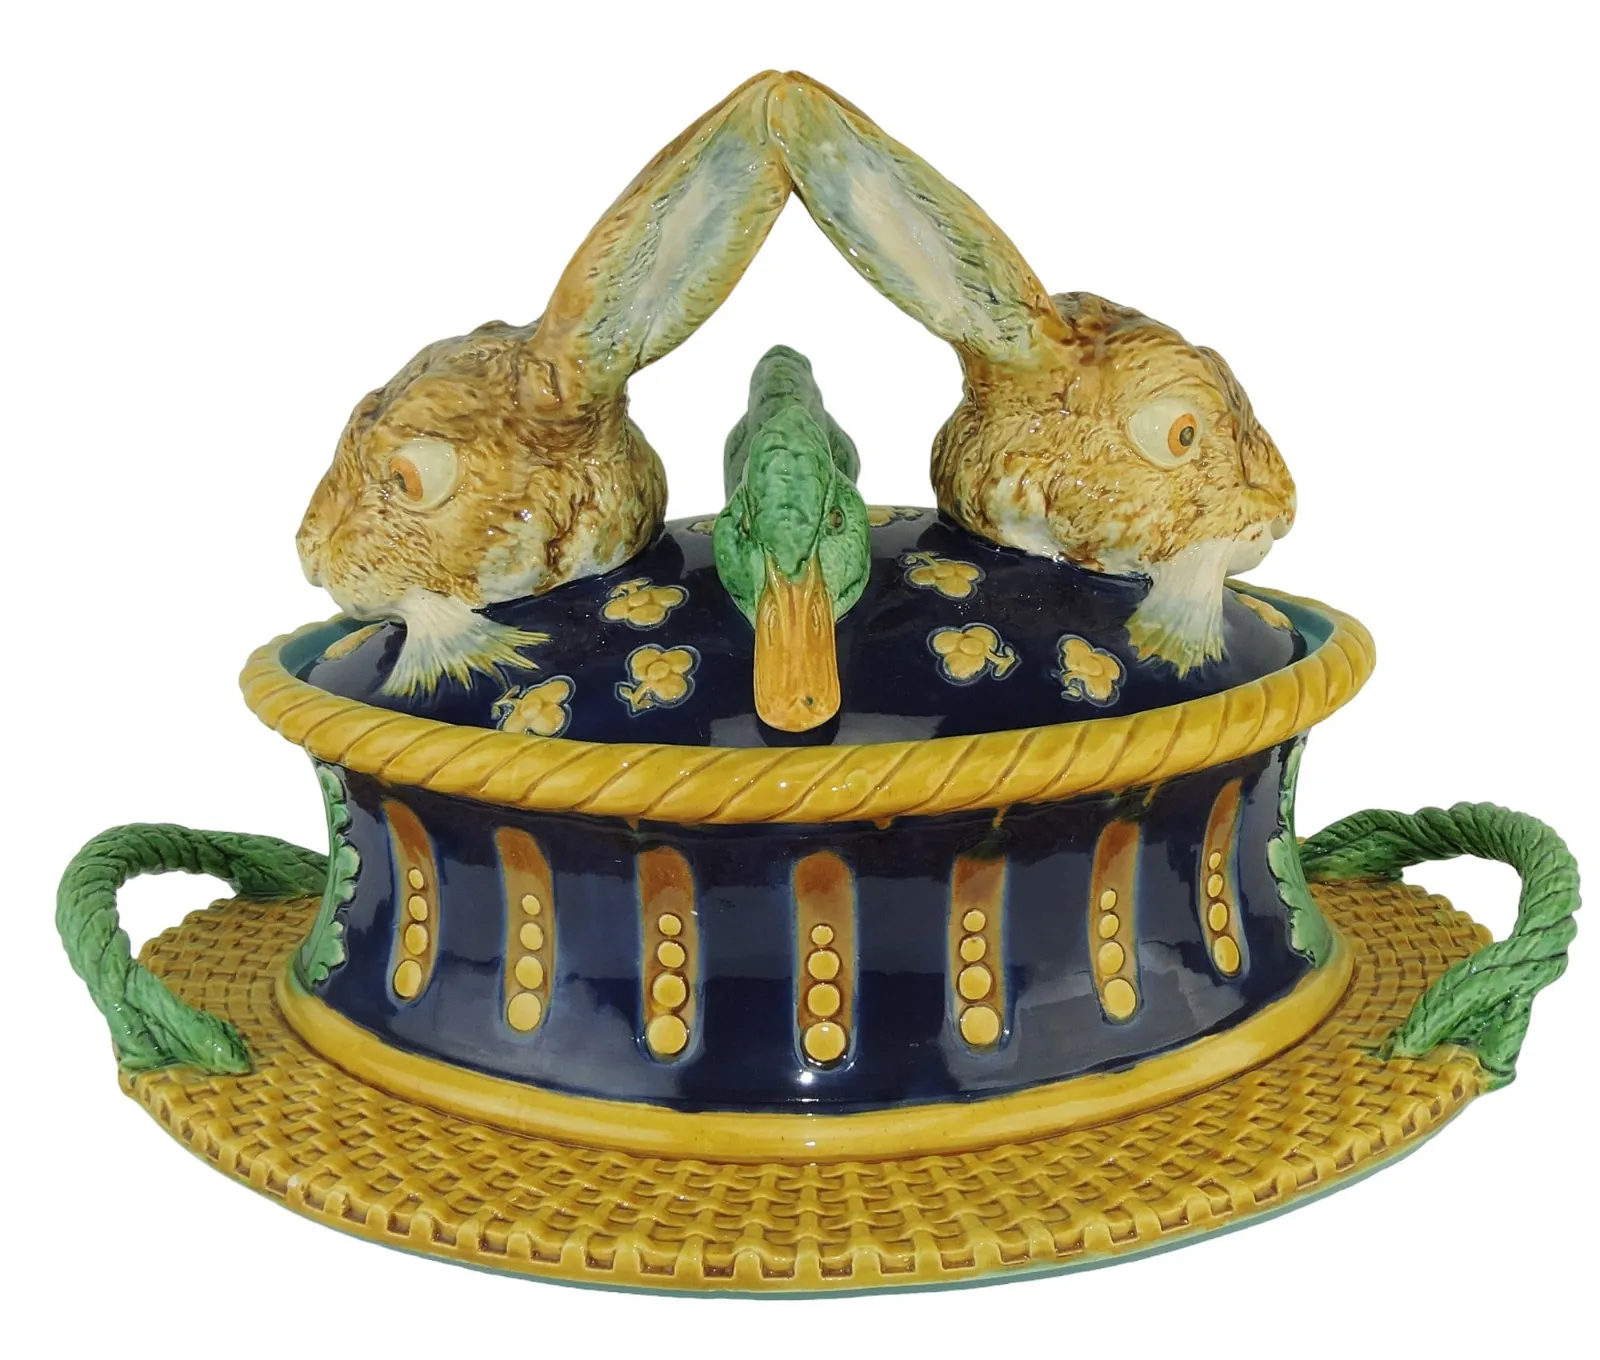 Second sale of the Flower majolica collection blooms at Strawser March 16